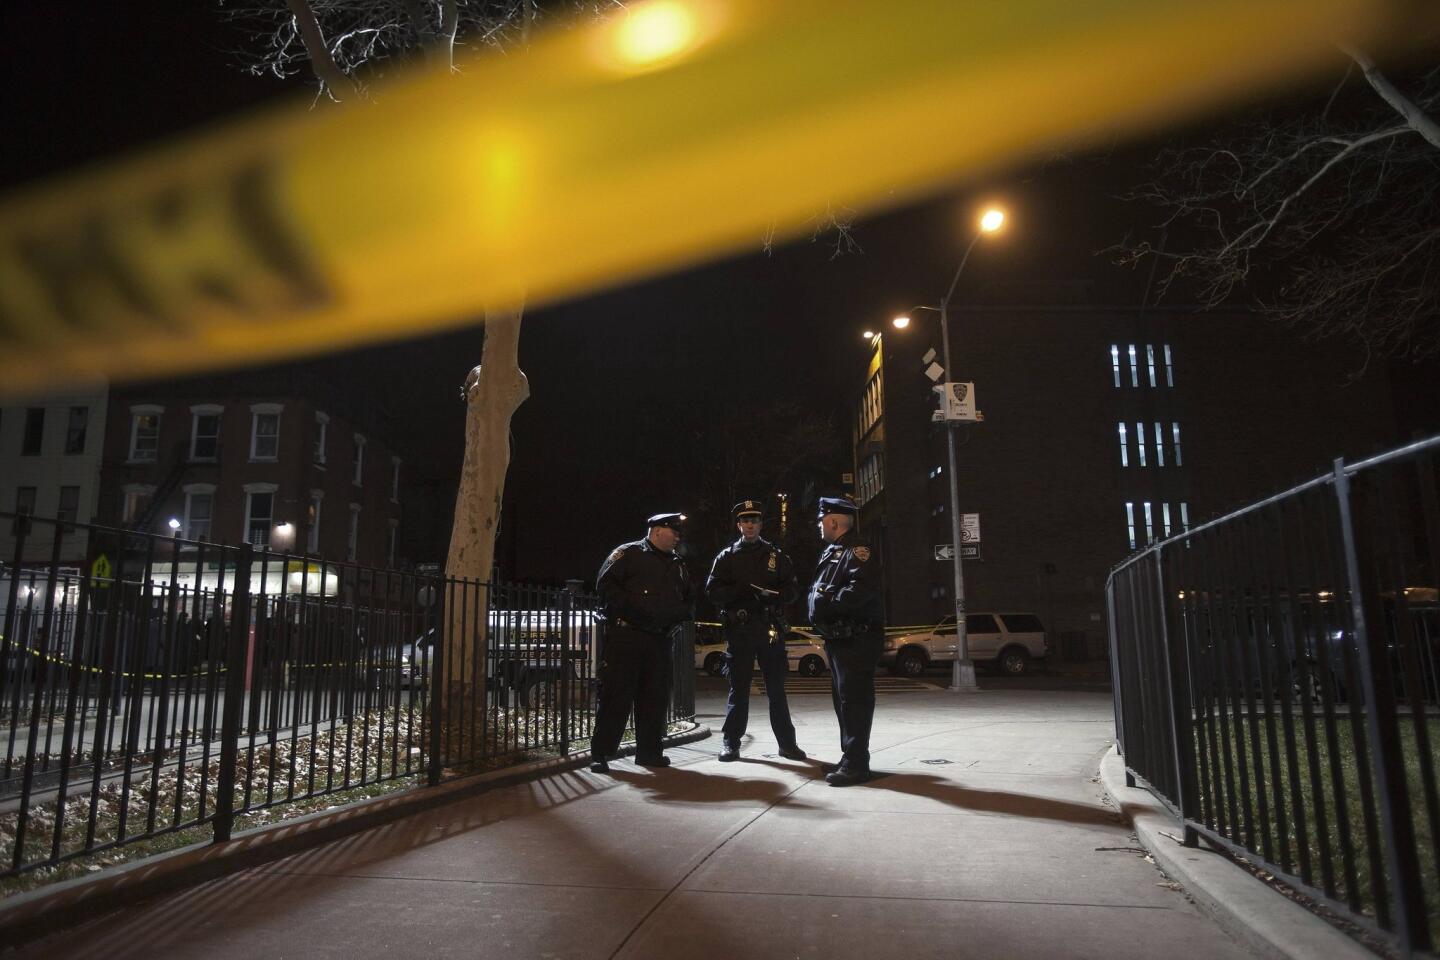 Police are pictured at the scene of a shooting where two New York Police officers were shot dead in the Brooklyn borough of New York